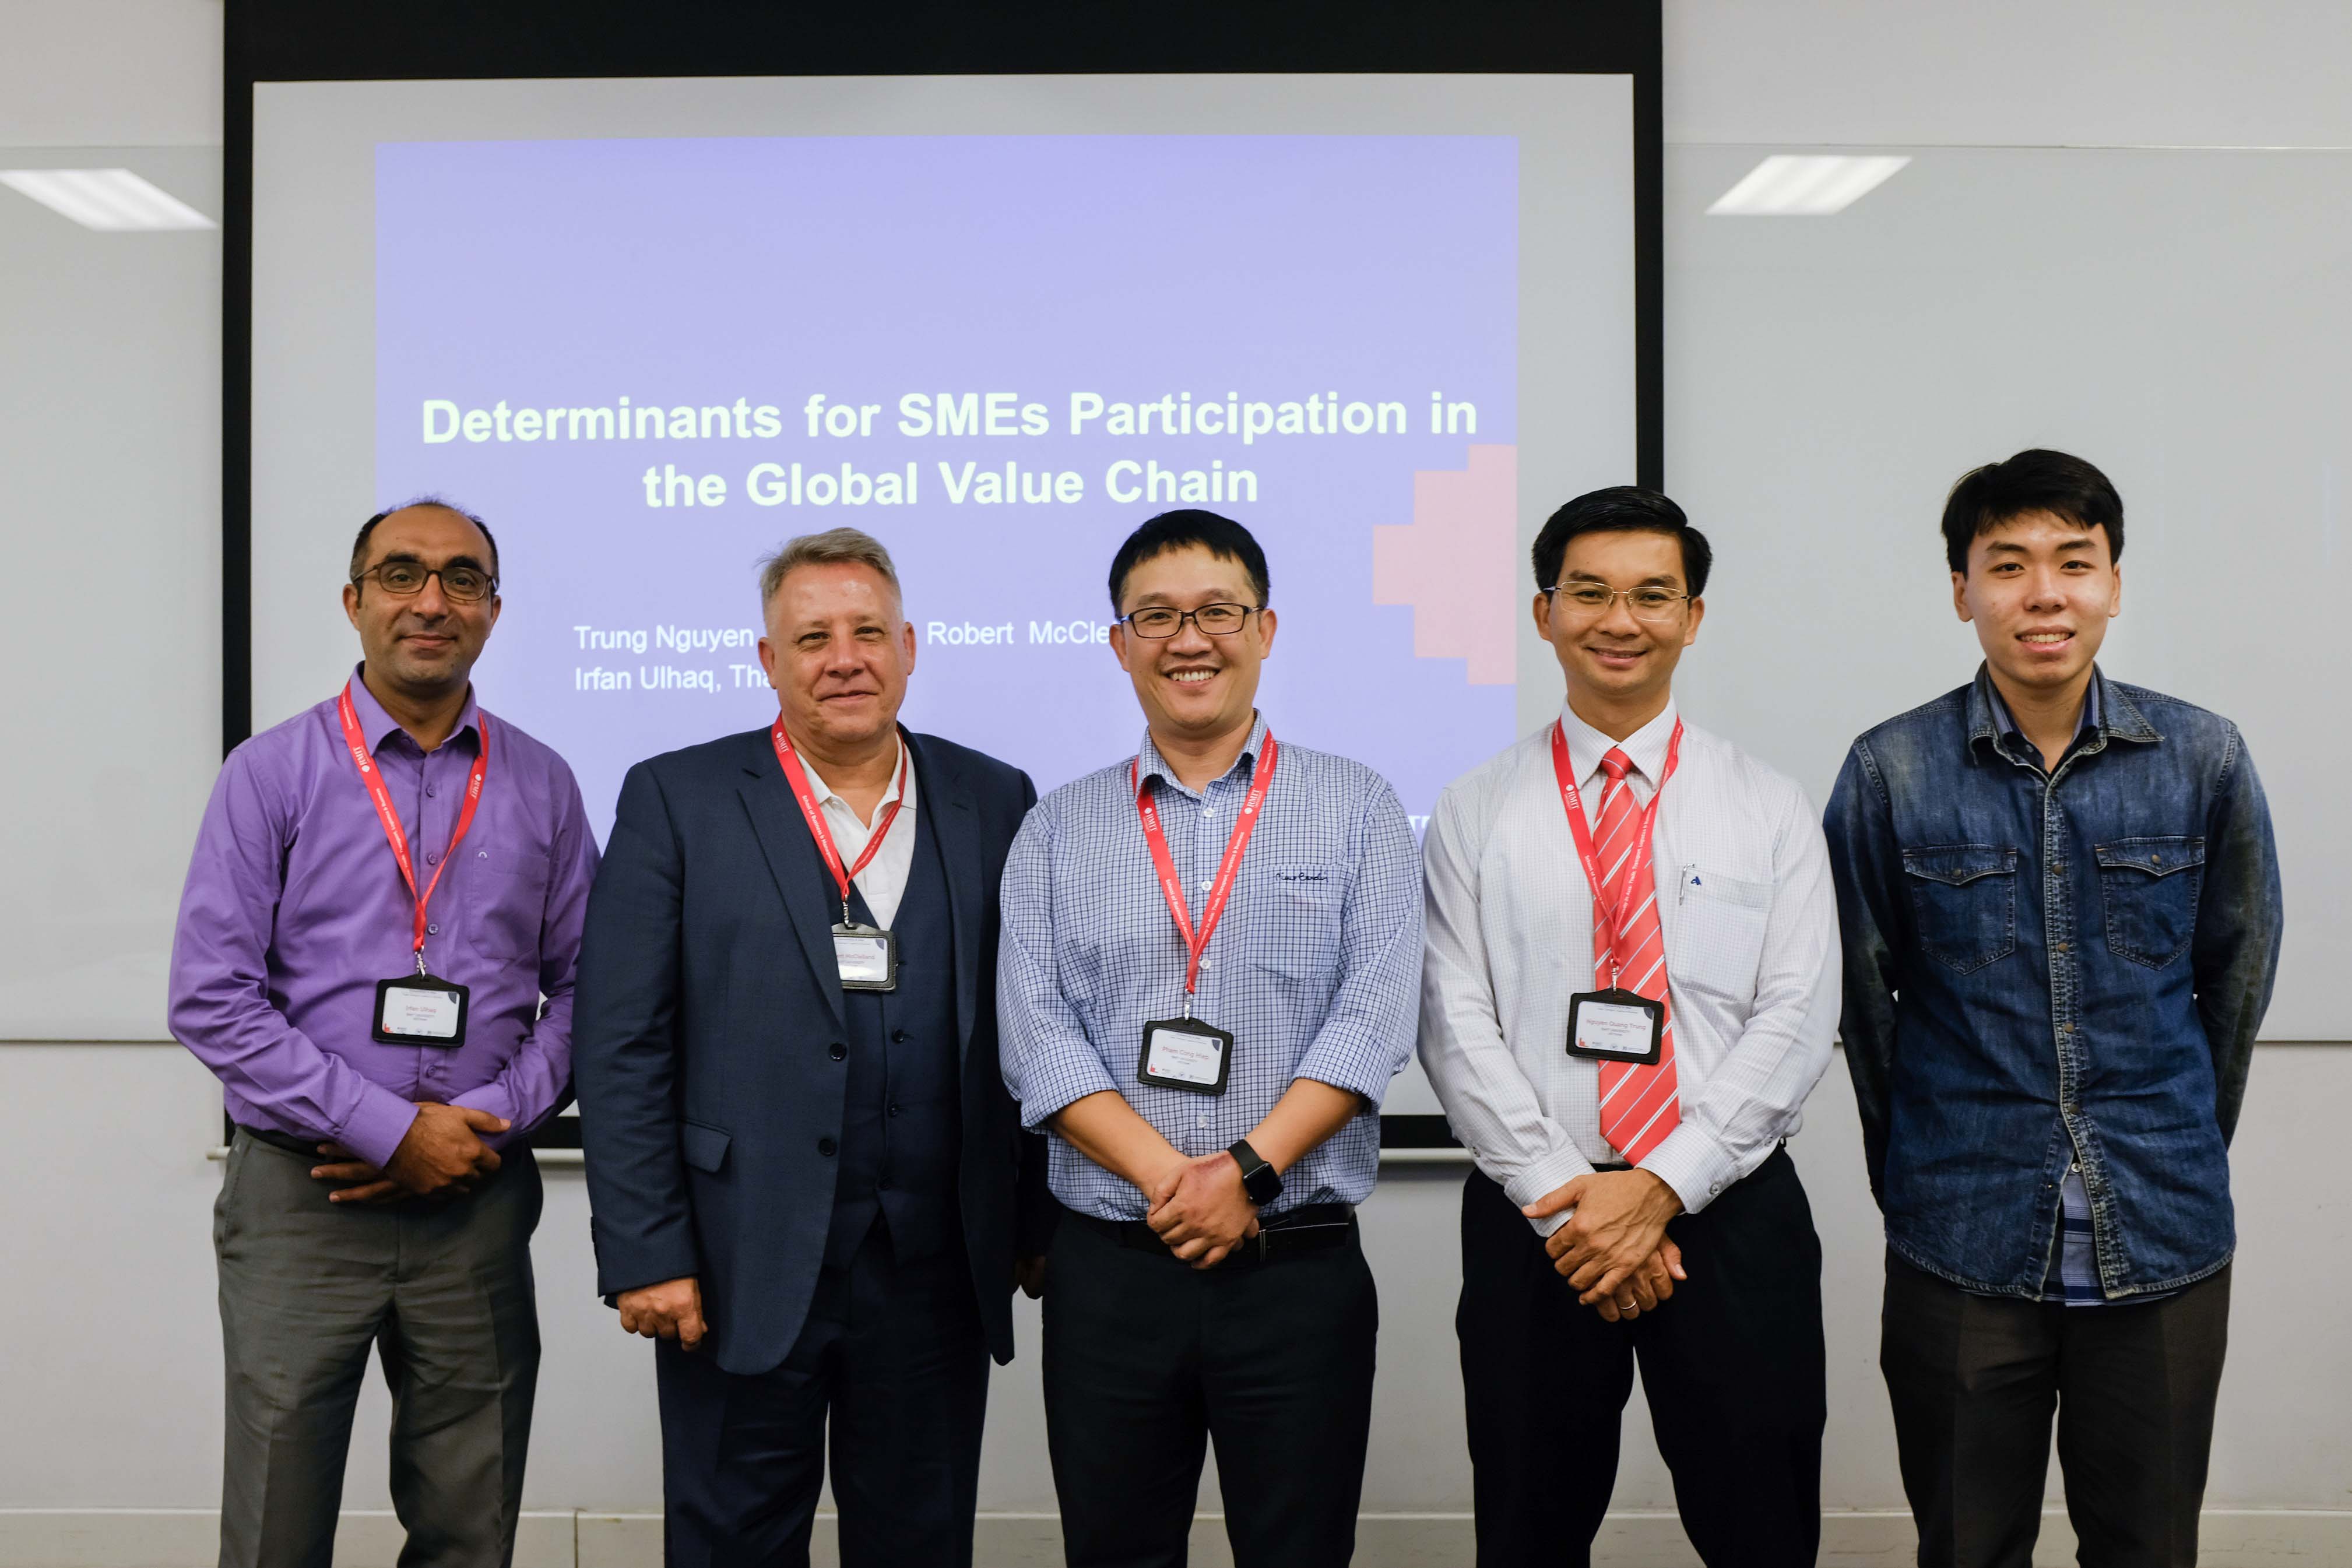 Research team members: (from left to right) Irfan Ulhaq (Associate Lecturer), Associate Professor Robert McClelland (Head of Department for Management), Dr Pham Cong Hiep (Discipline Lead for the Logistics and Supply Chain Management program), Dr Nguyen Quang Trung (Discipline Lead for the International Business program), and Dang Vu Thanh (Academic Support Officer).